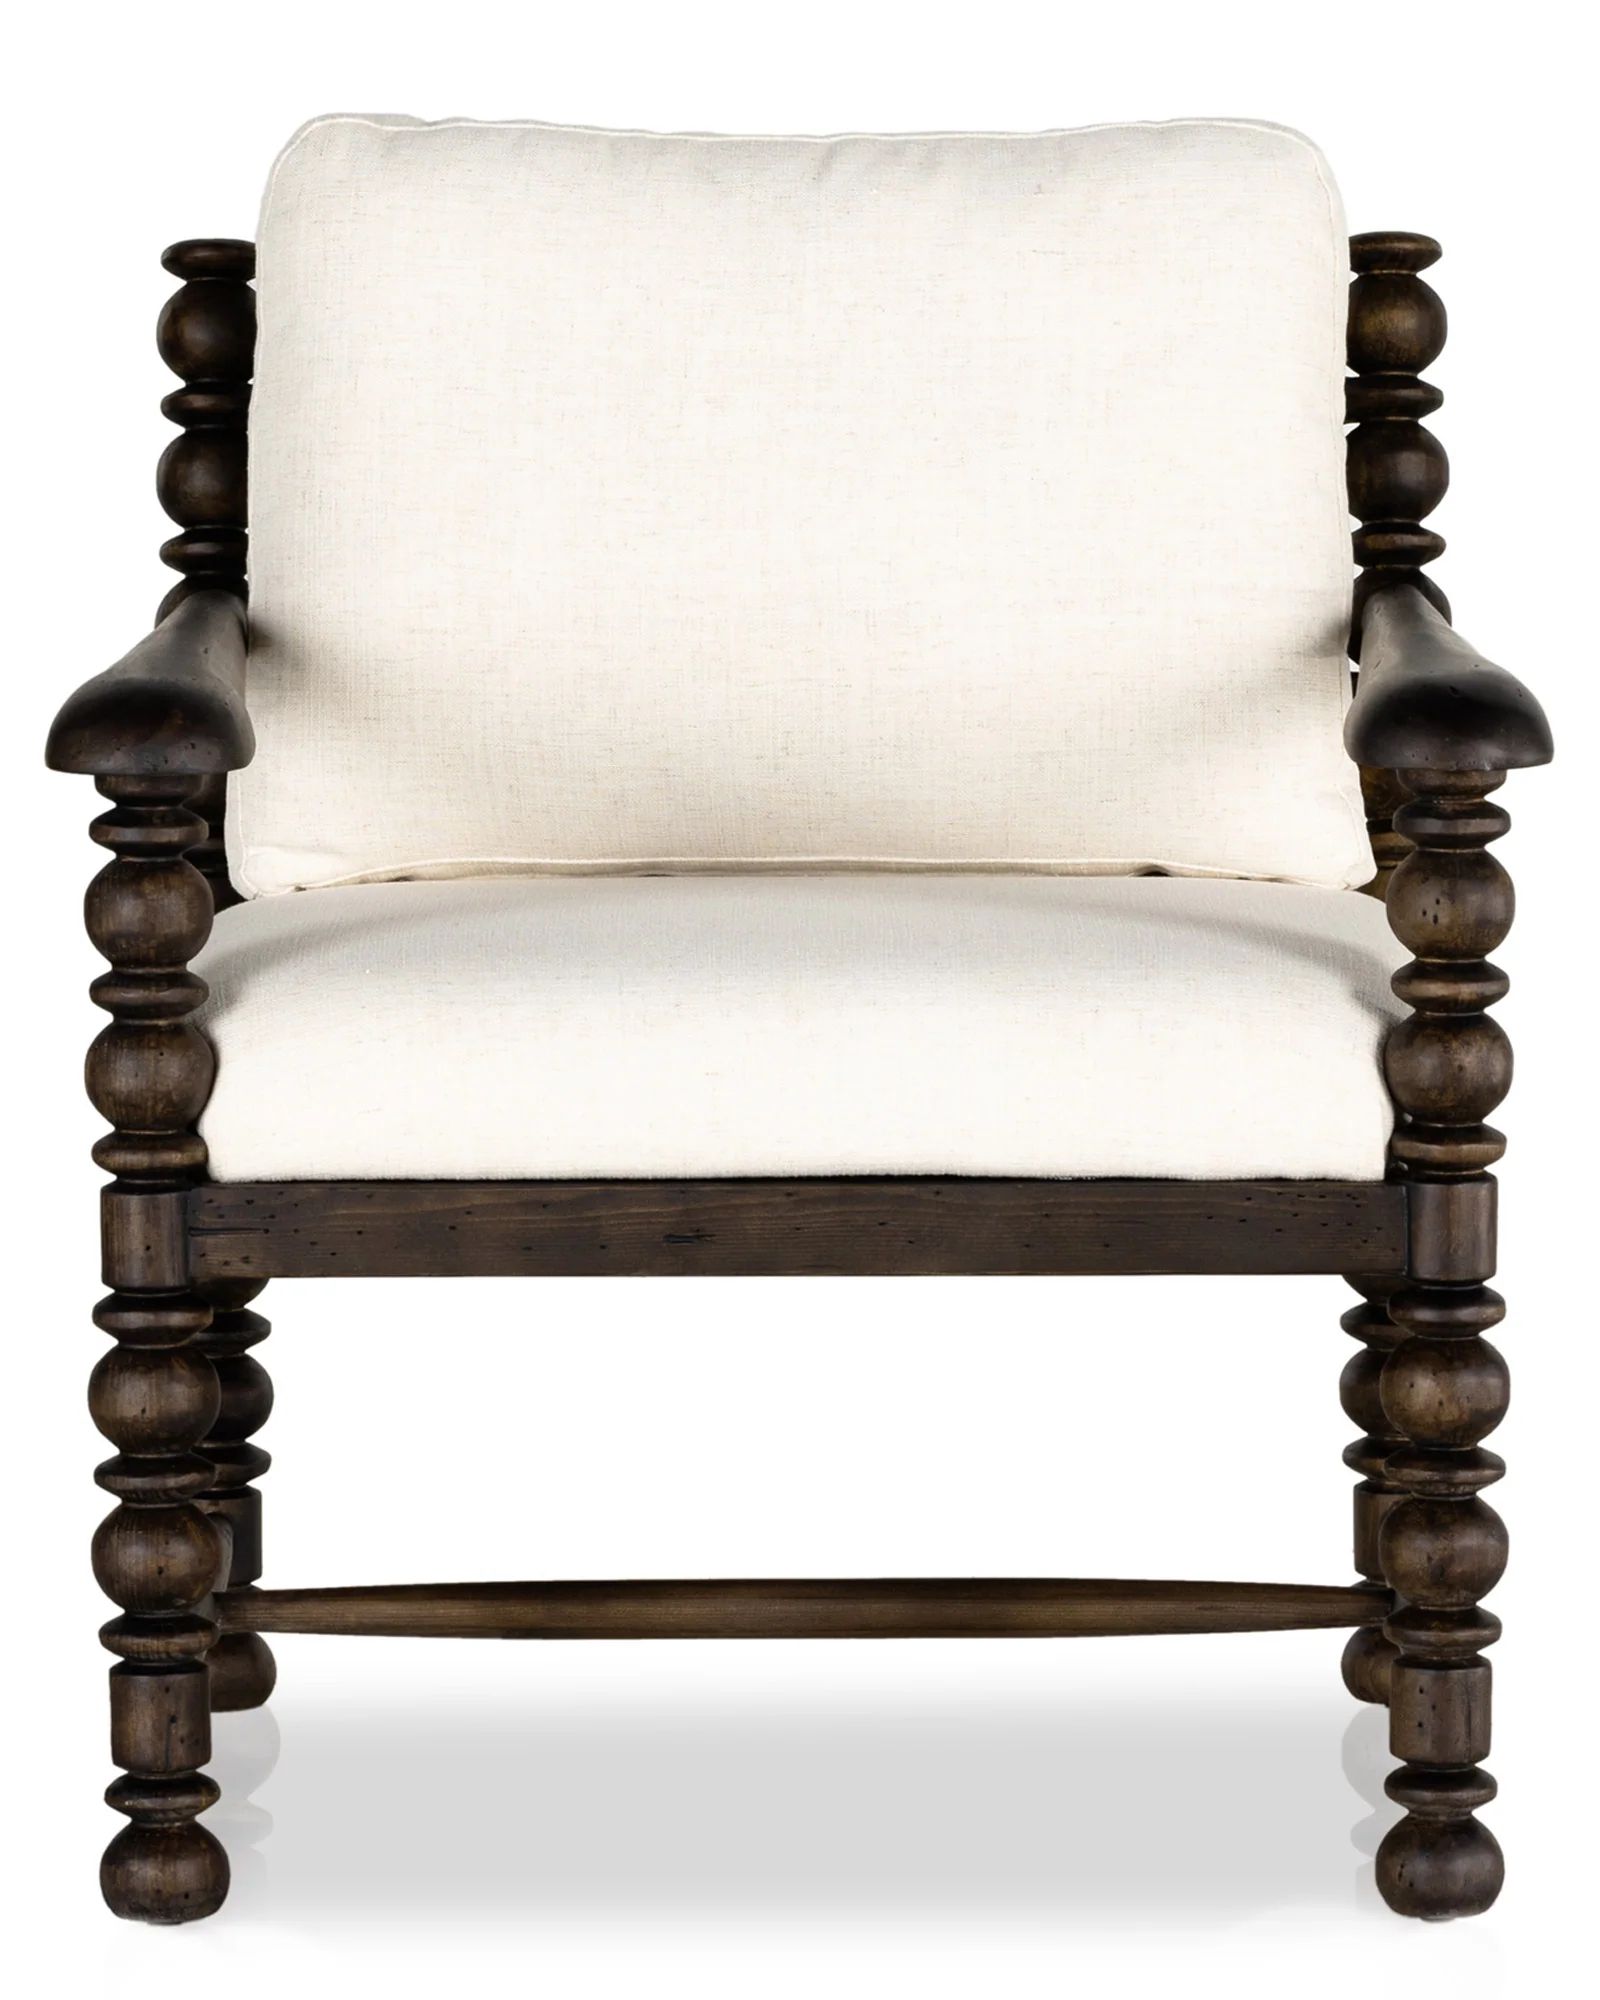 Lore Chair | The Vintage Rug Shop